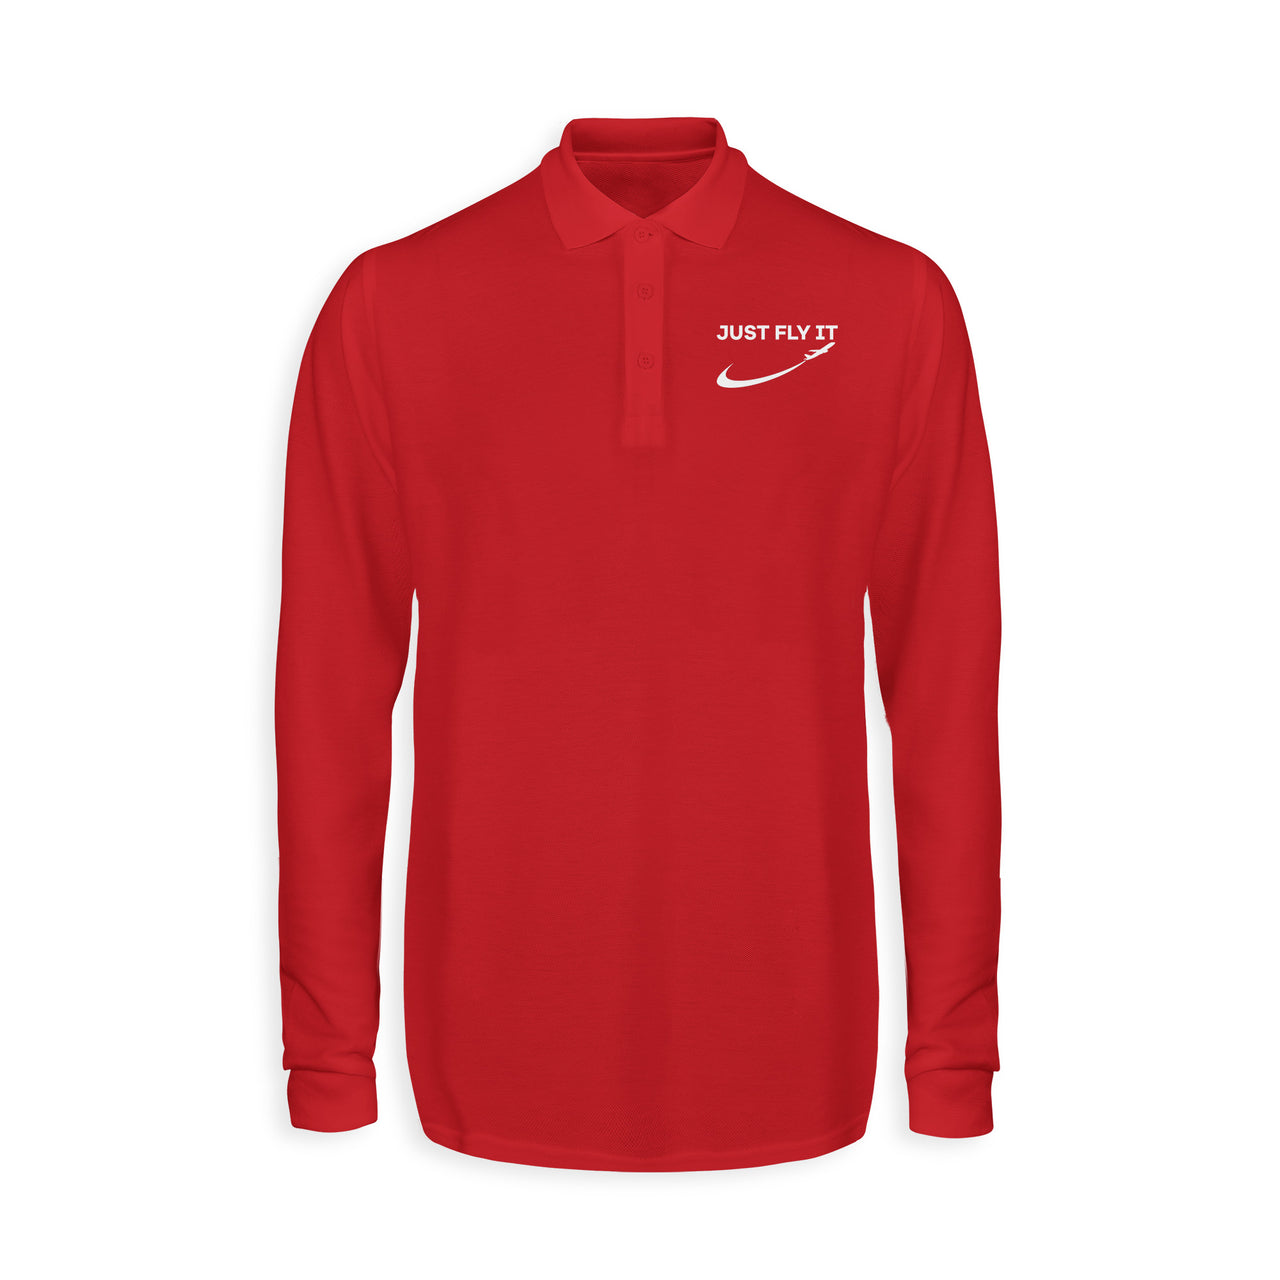 Just Fly It 2 Designed Long Sleeve Polo T-Shirts